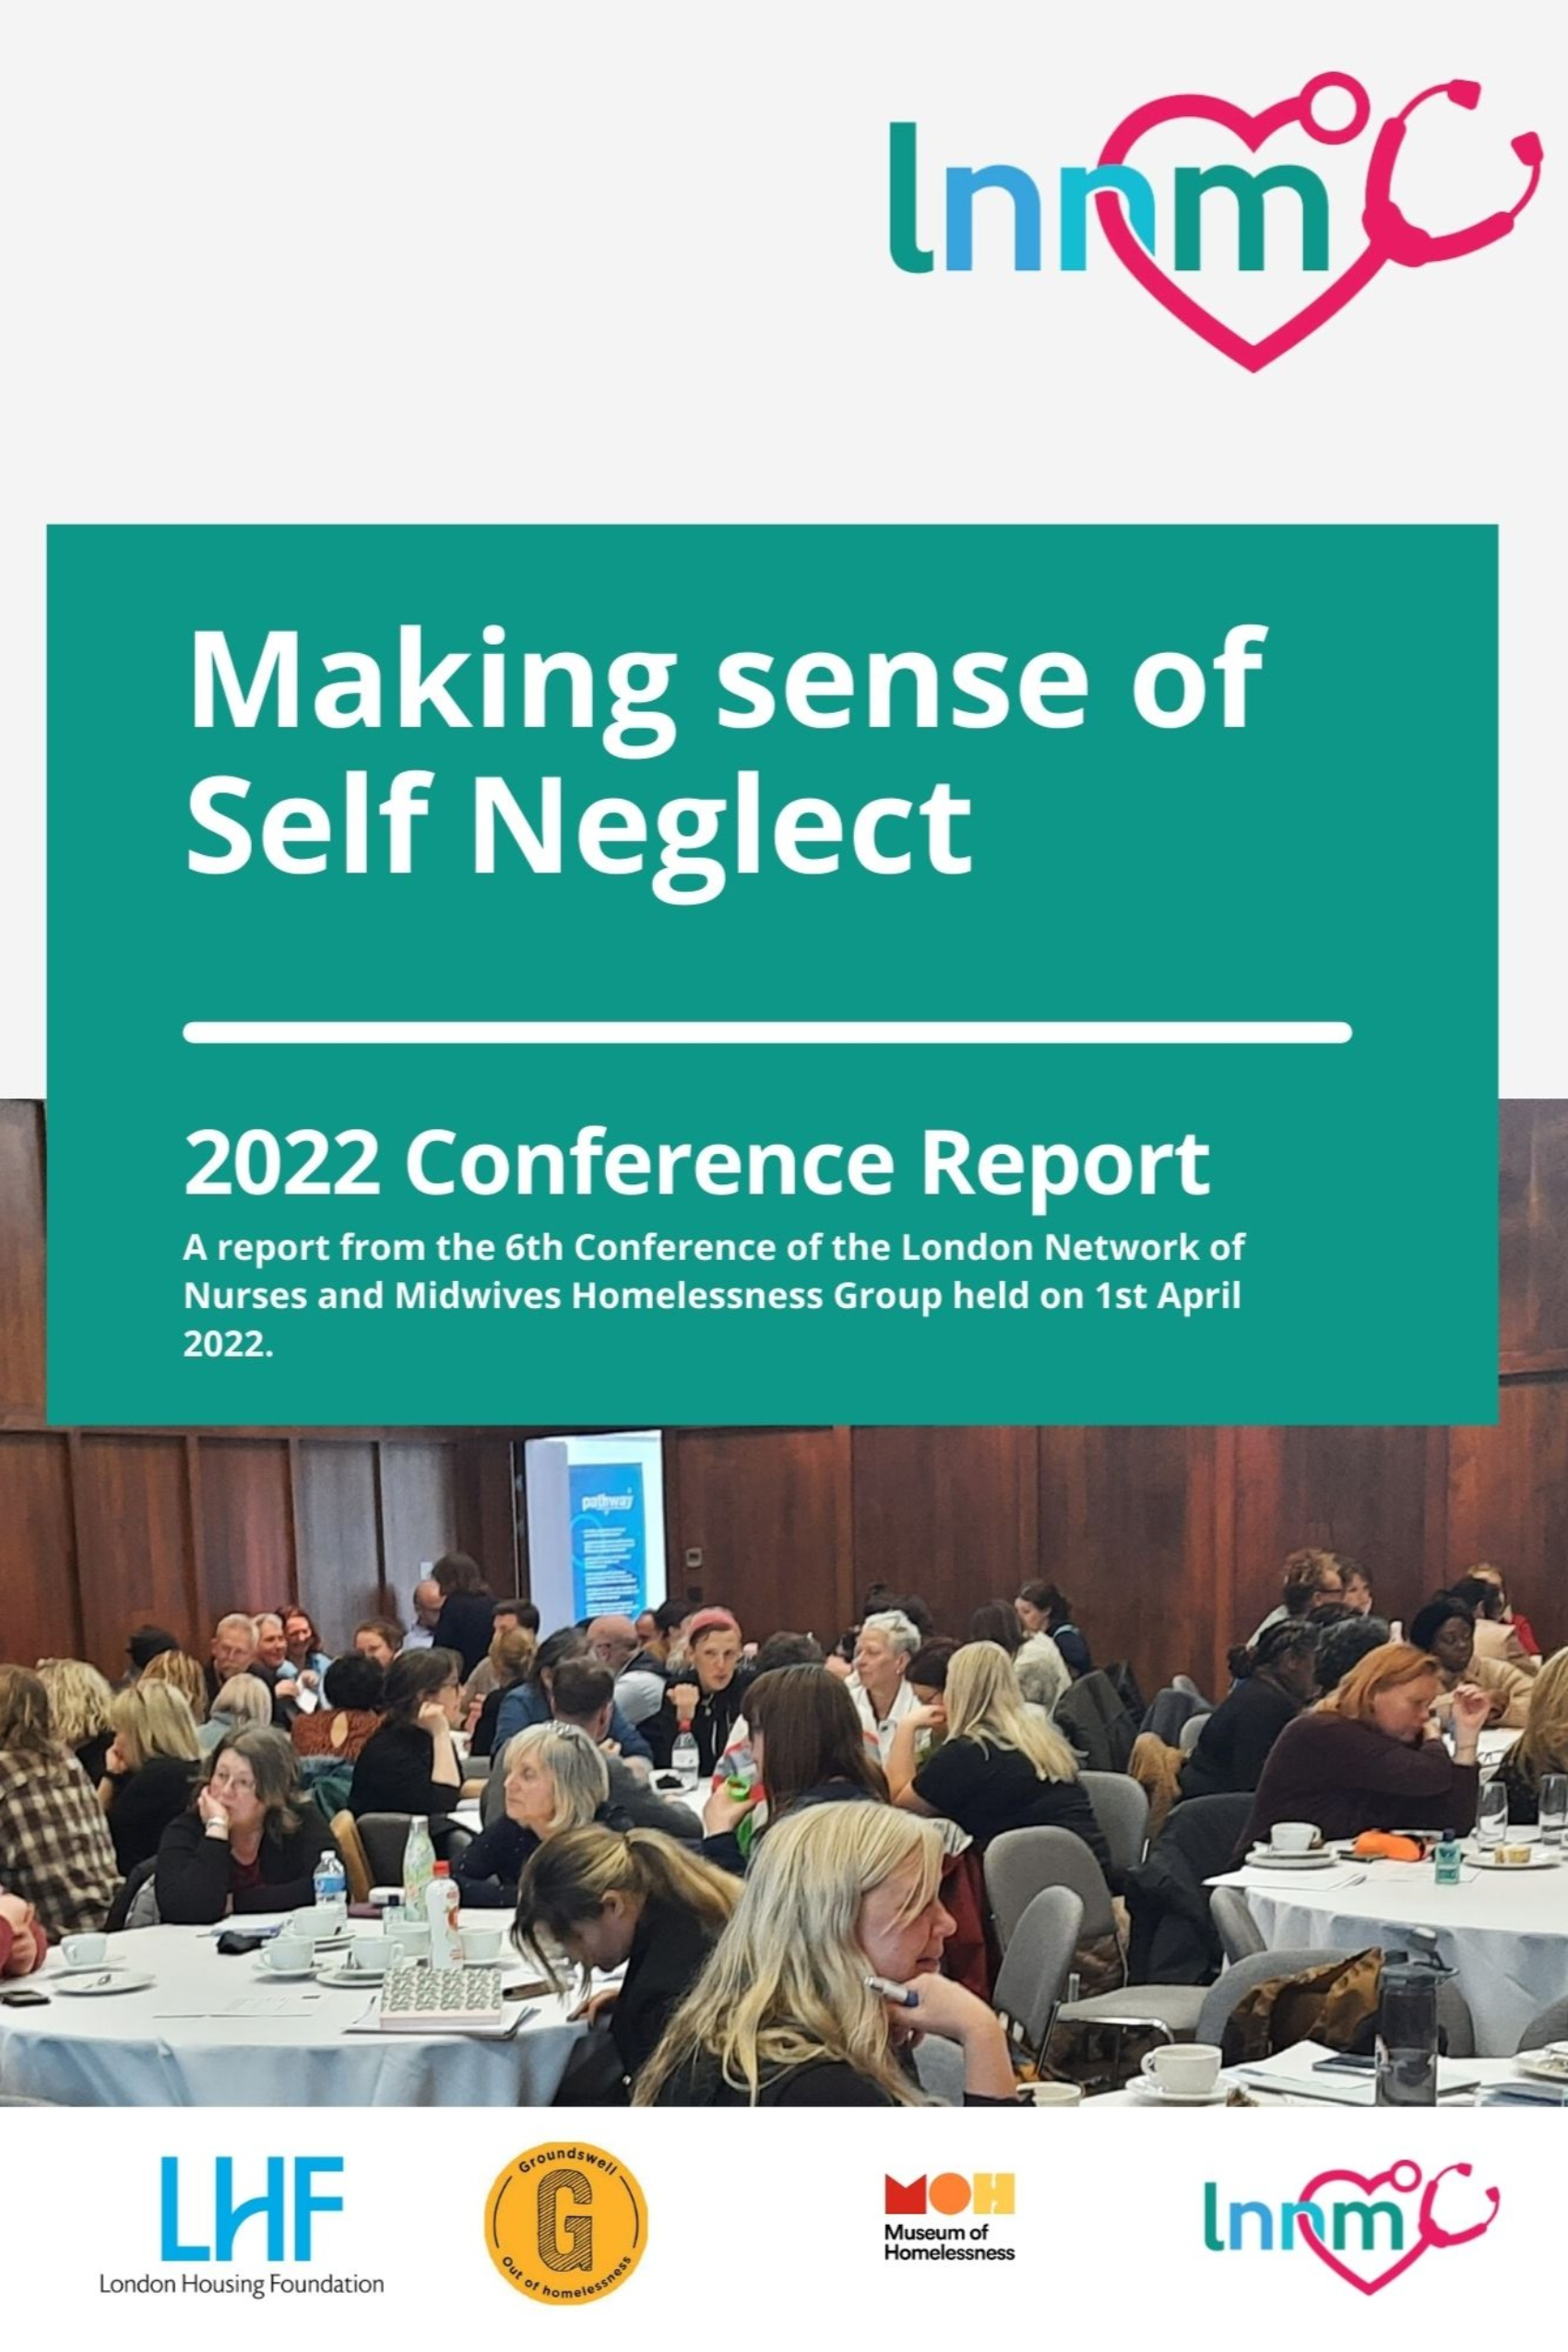 Front cover of conference report